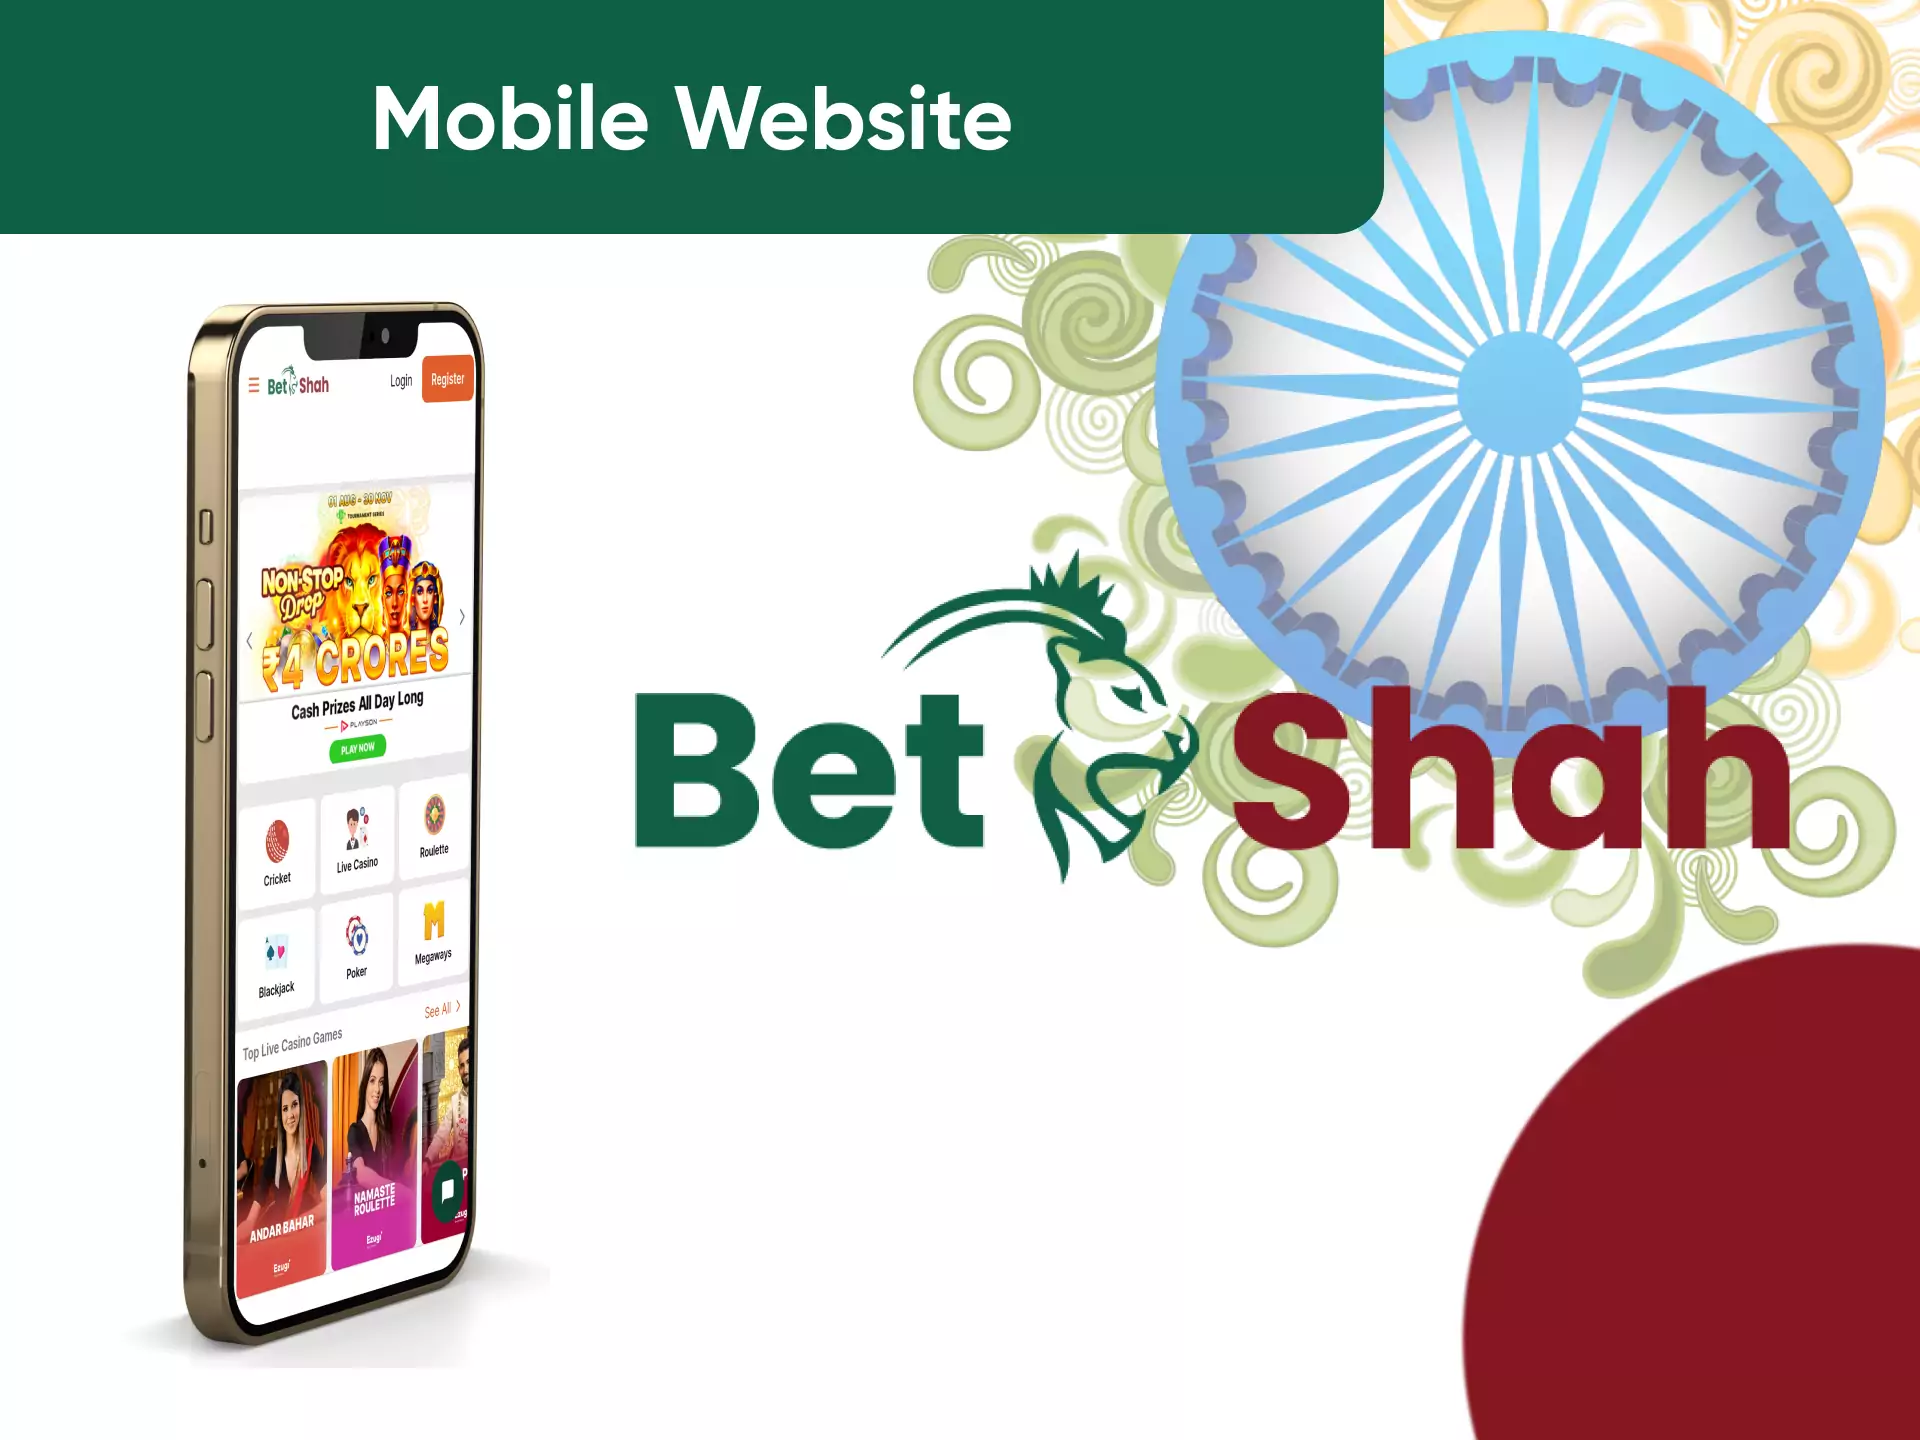 For visiting Betshah from your smartphone, use the mobile version of the site.